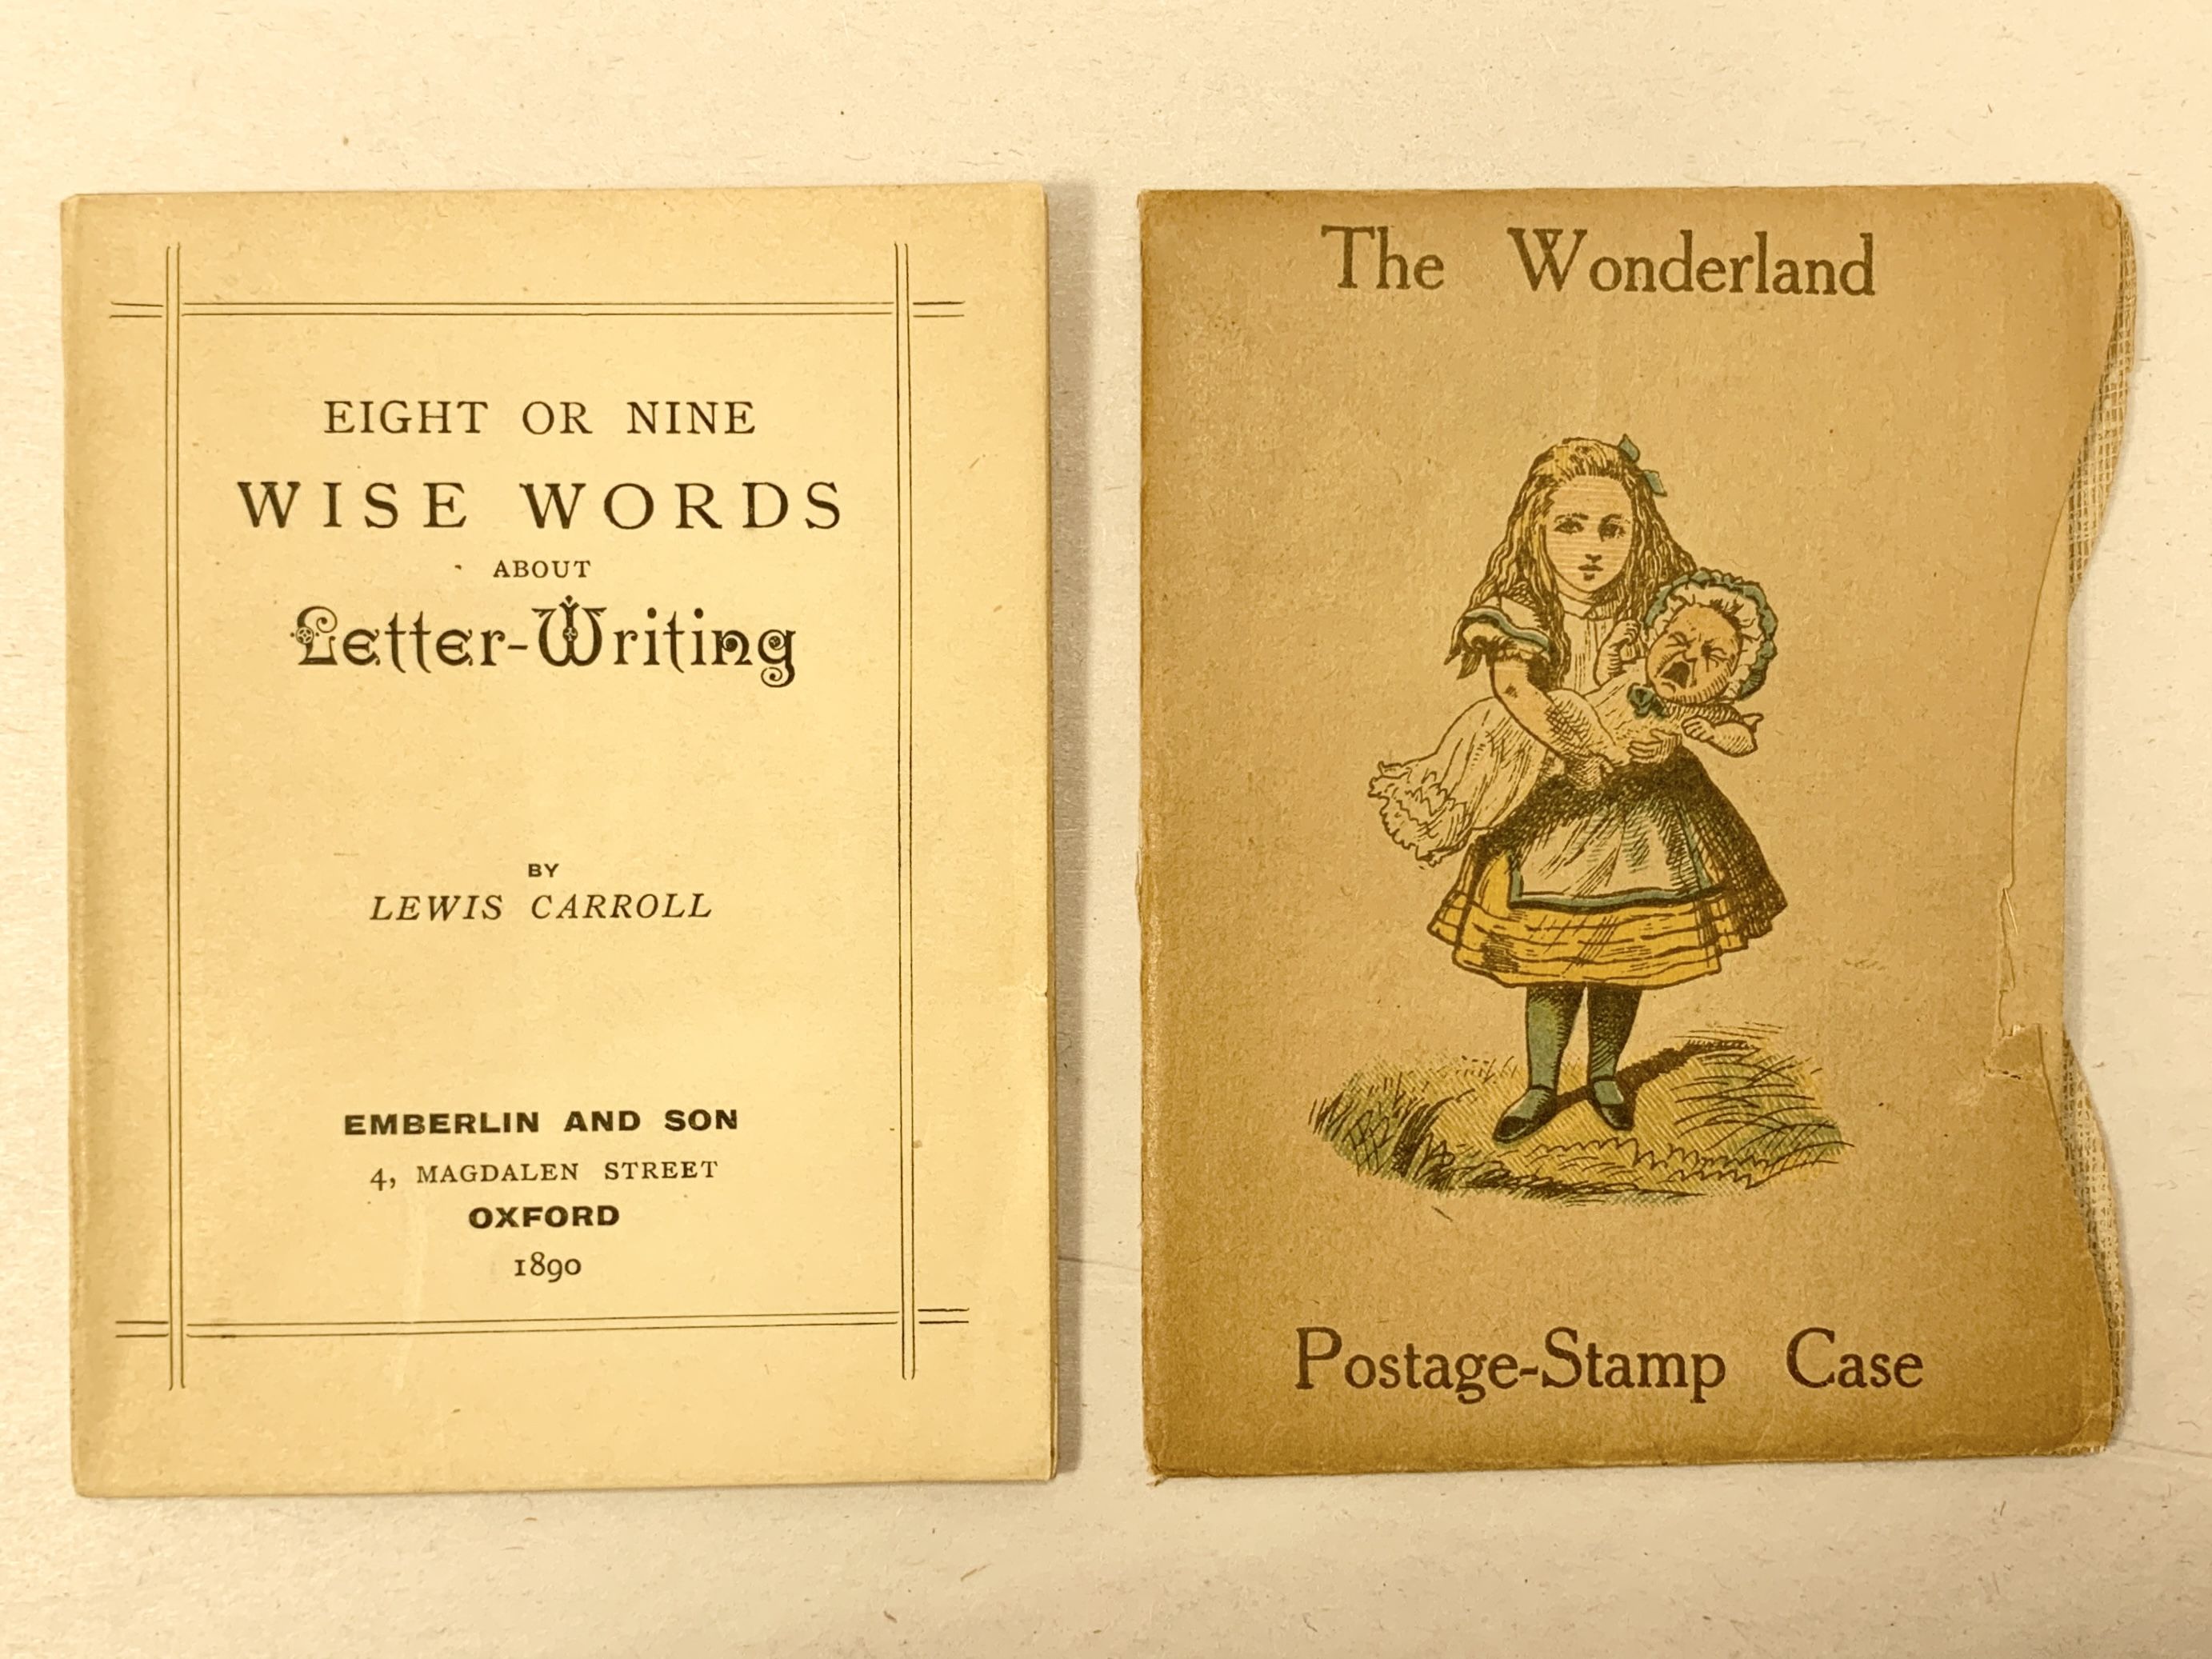 The Wonderland Postage-Stamp Case with Eight or Nine Wise Words About Letter-Writing